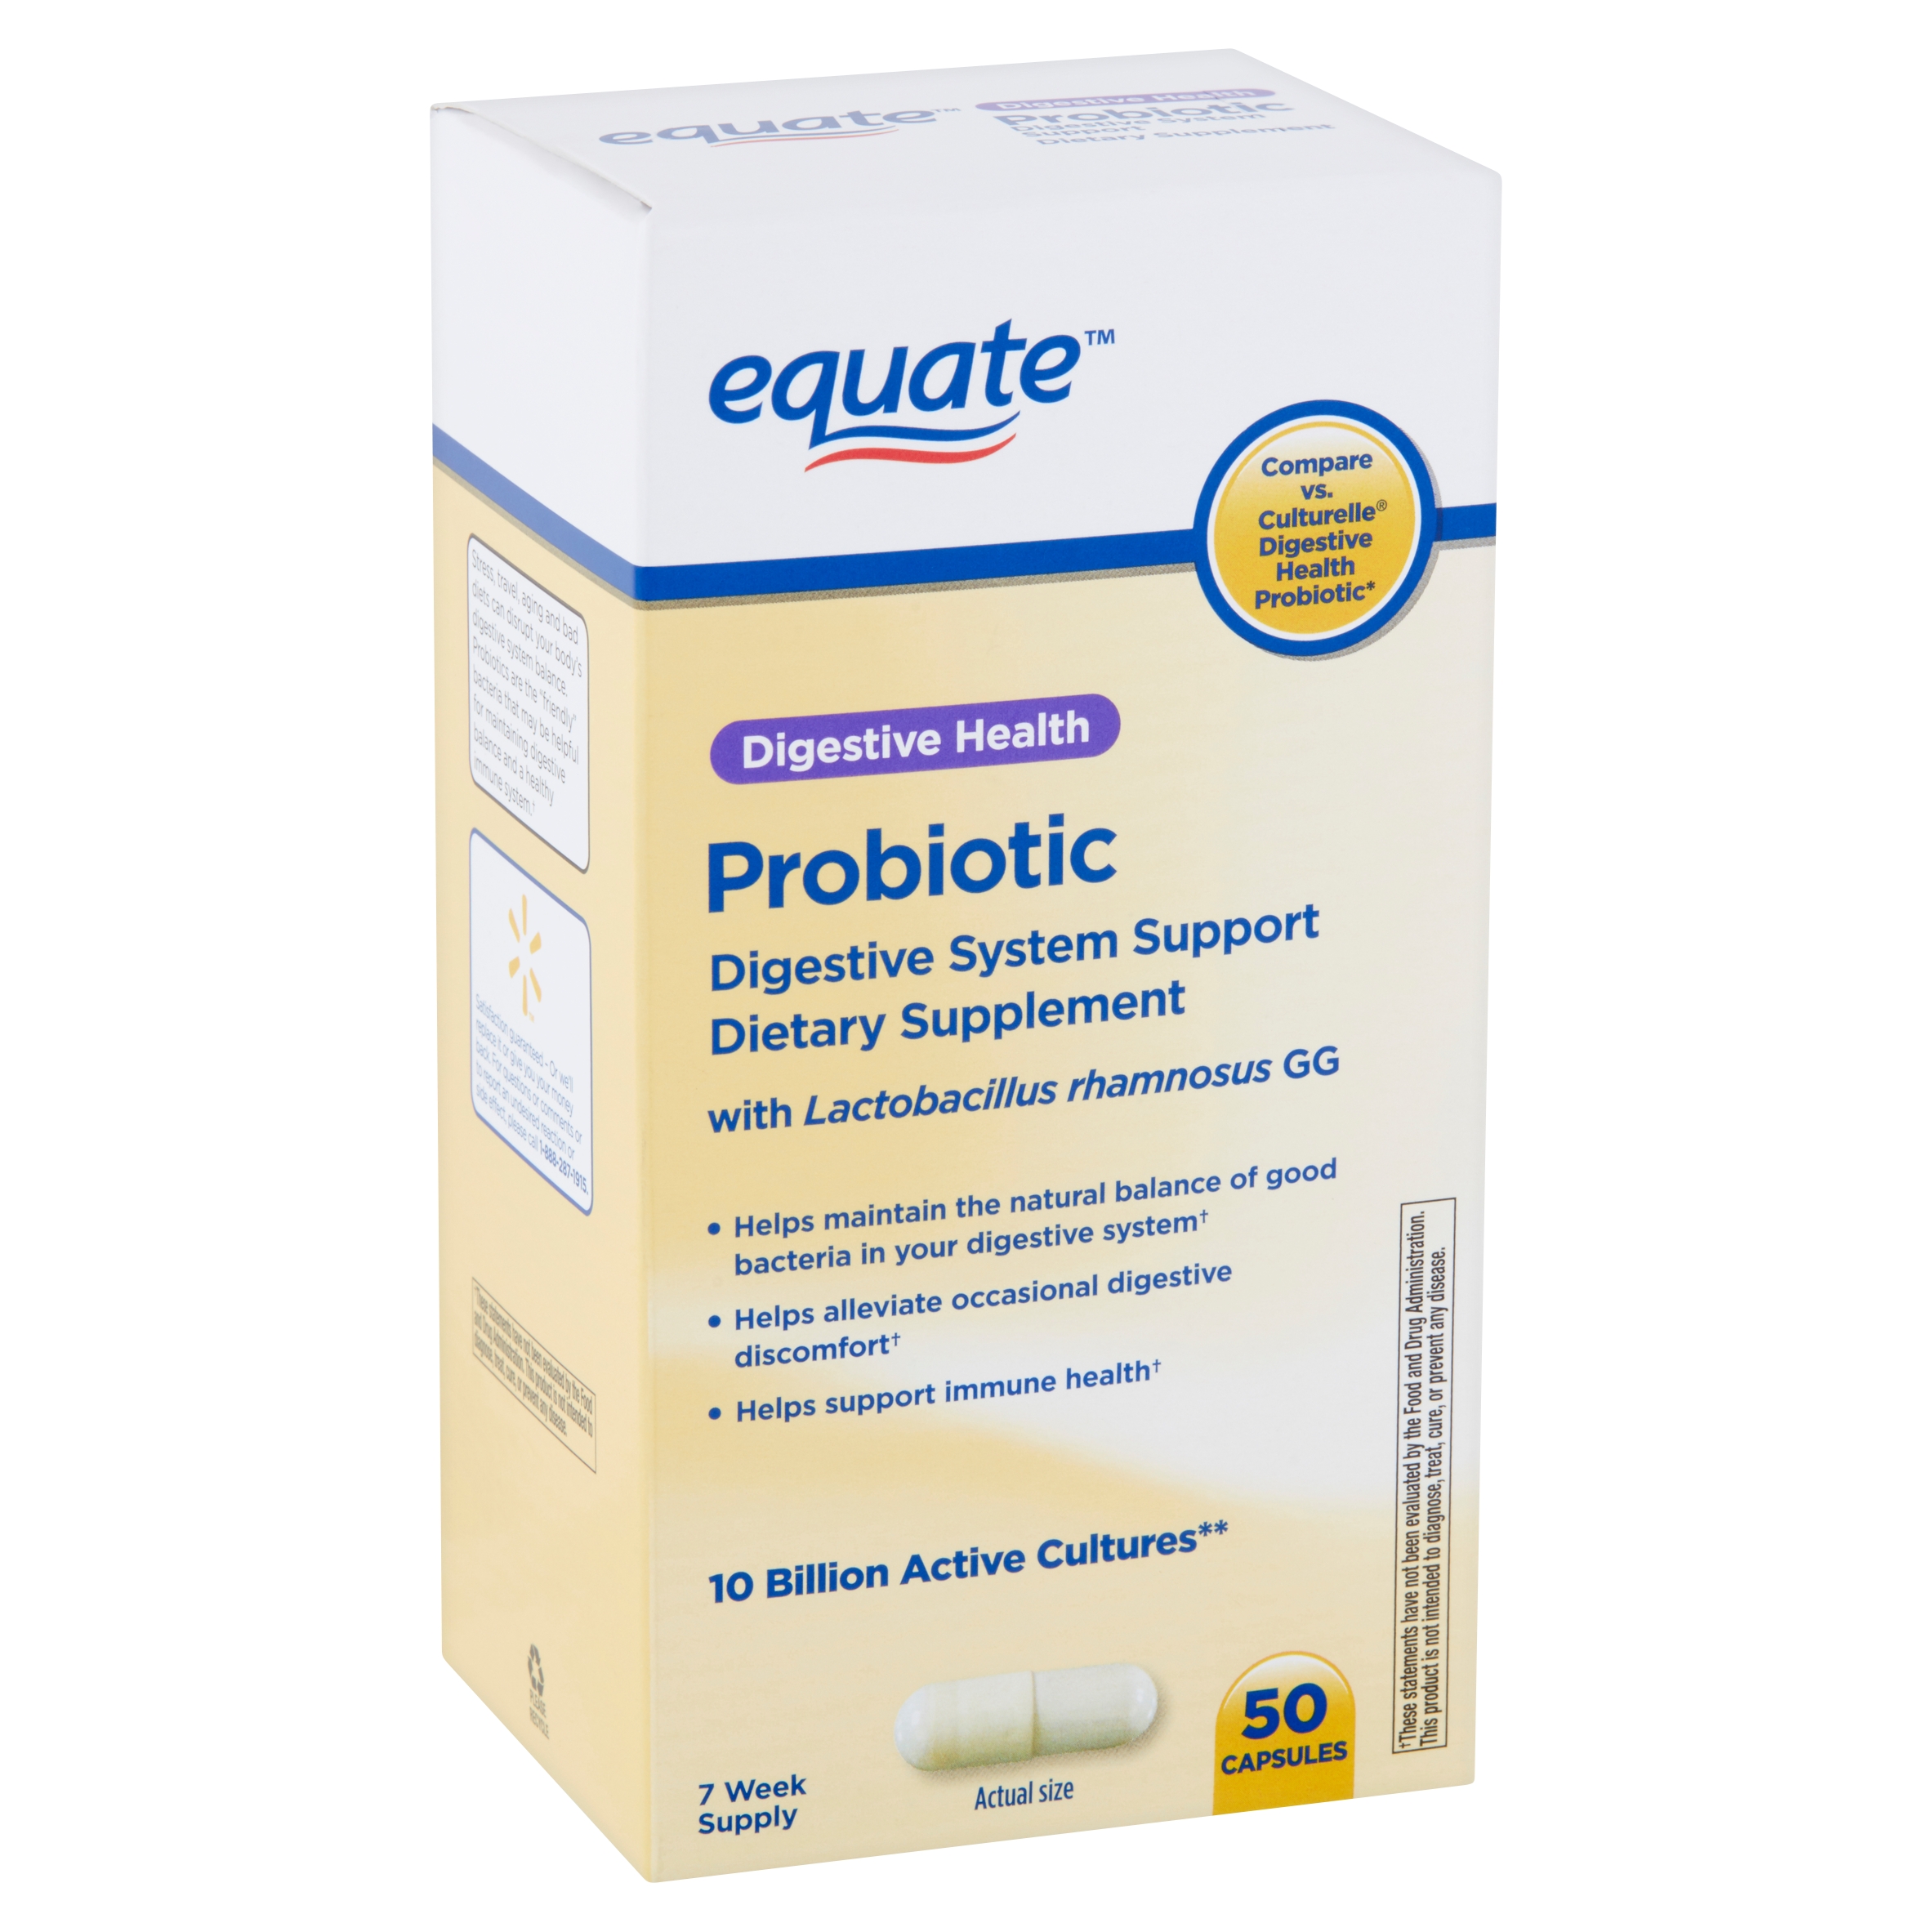 Equate Digestive Health Probiotic Capsules, 50 Count - image 1 of 11